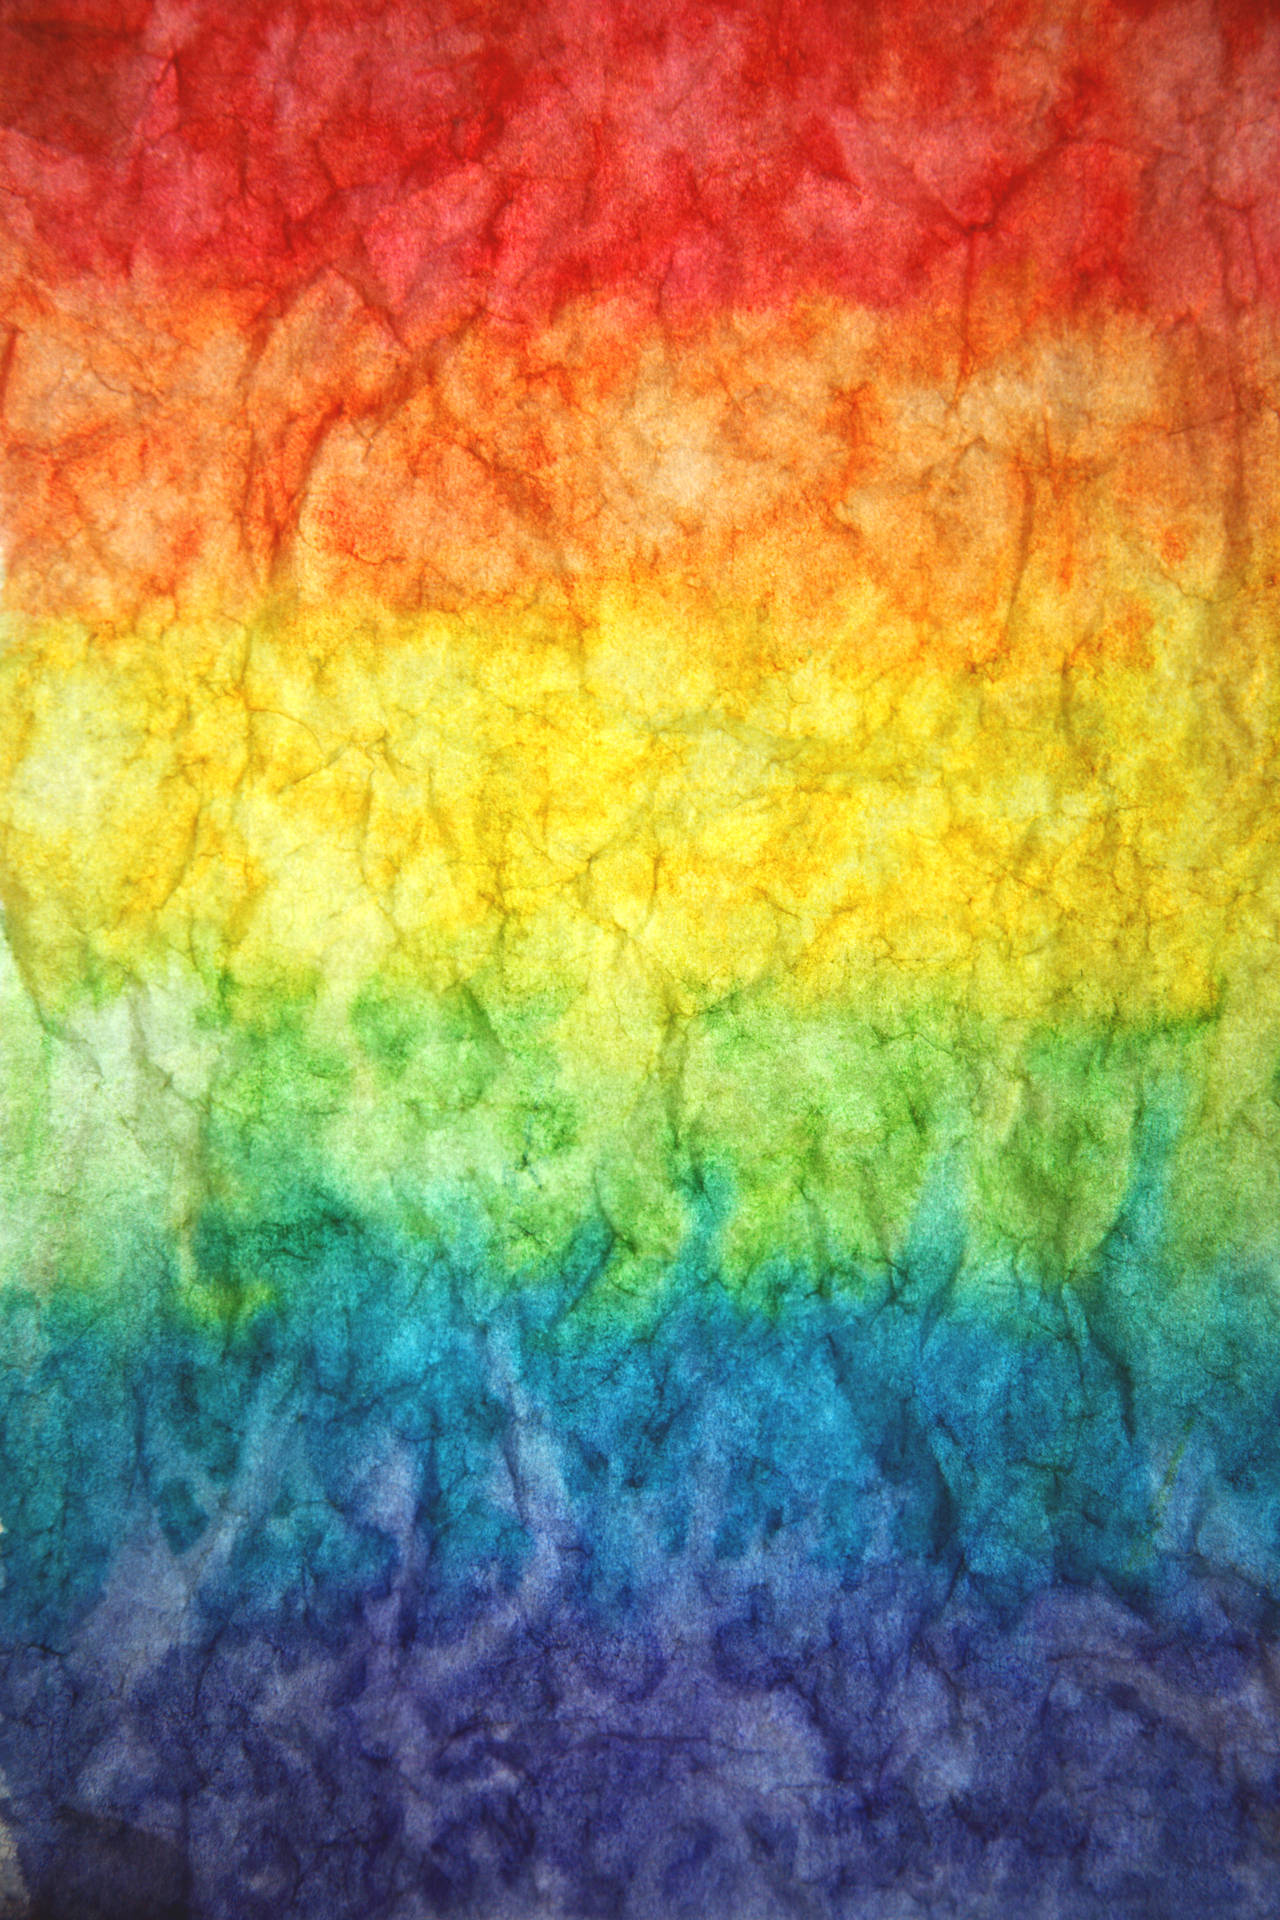 Tie Dye 3744X5616 Wallpaper and Background Image